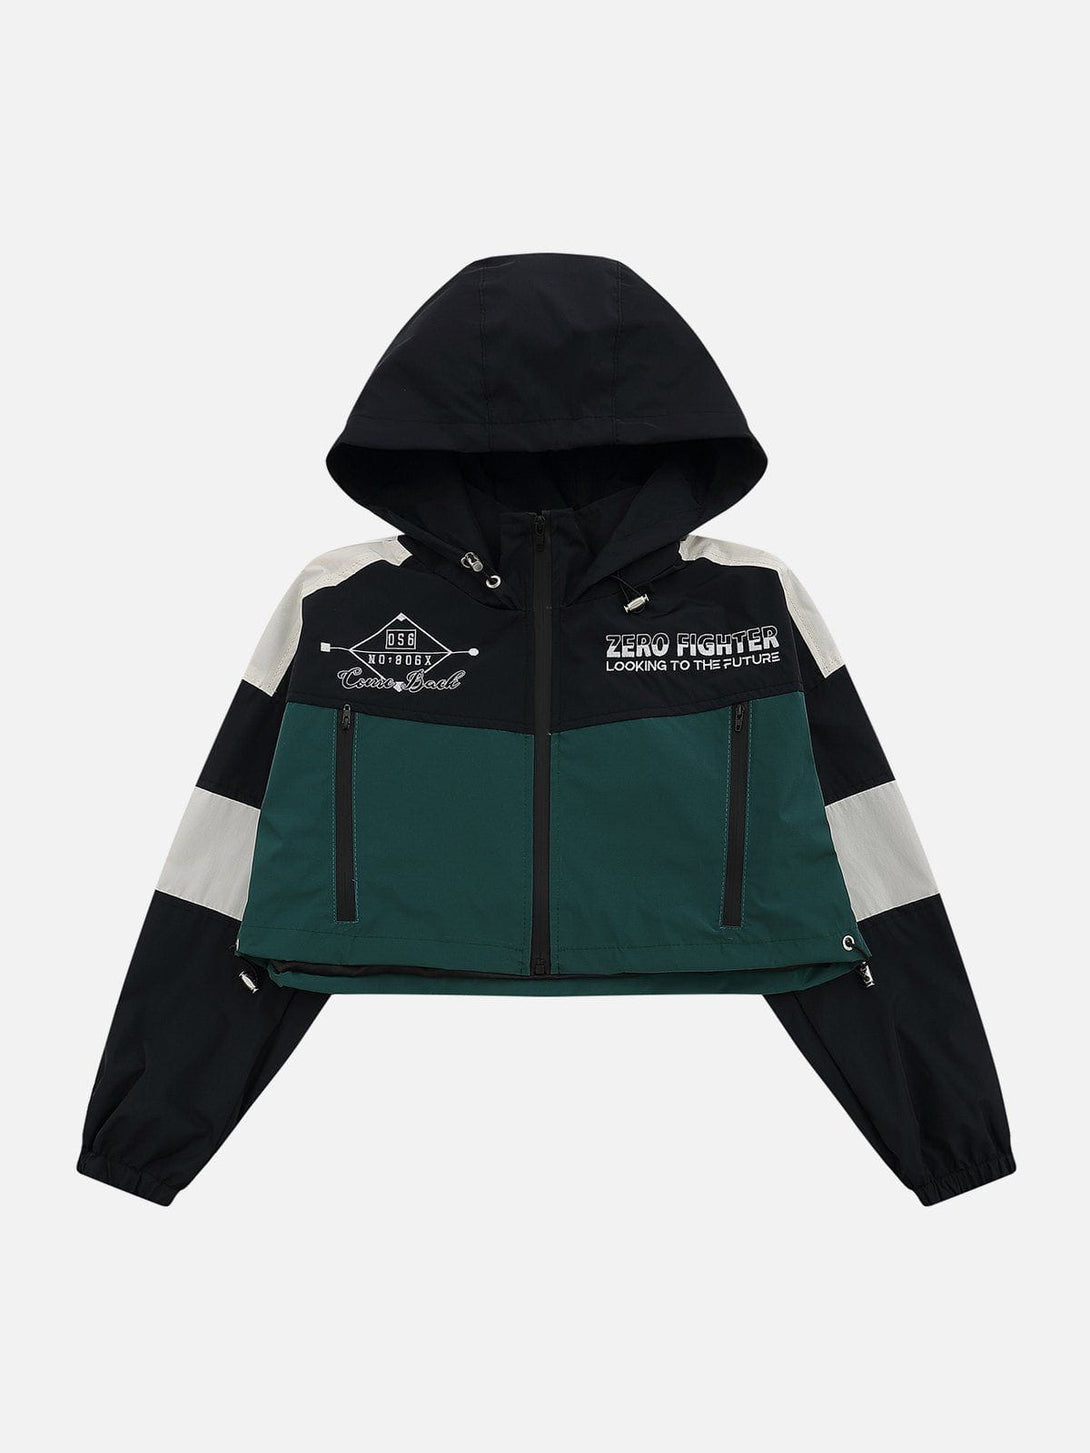 Levefly - ZIP UP Patchwork Racing Jacket - Streetwear Fashion - levefly.com